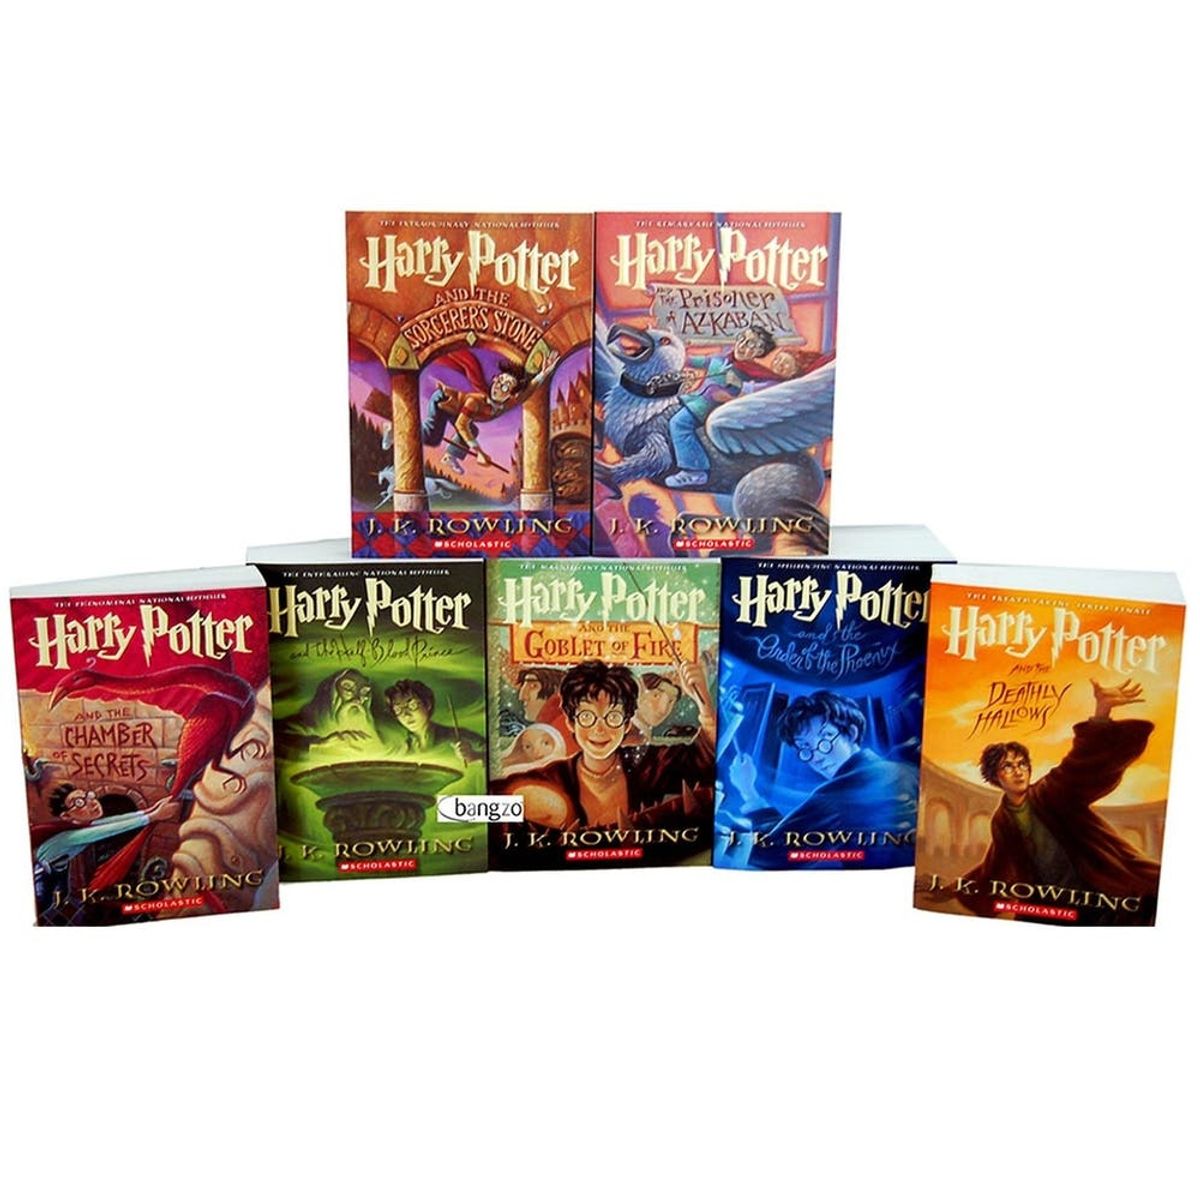 Here’s How to Nab the Complete Harry Potter Book Collection for Nearly Half the Price